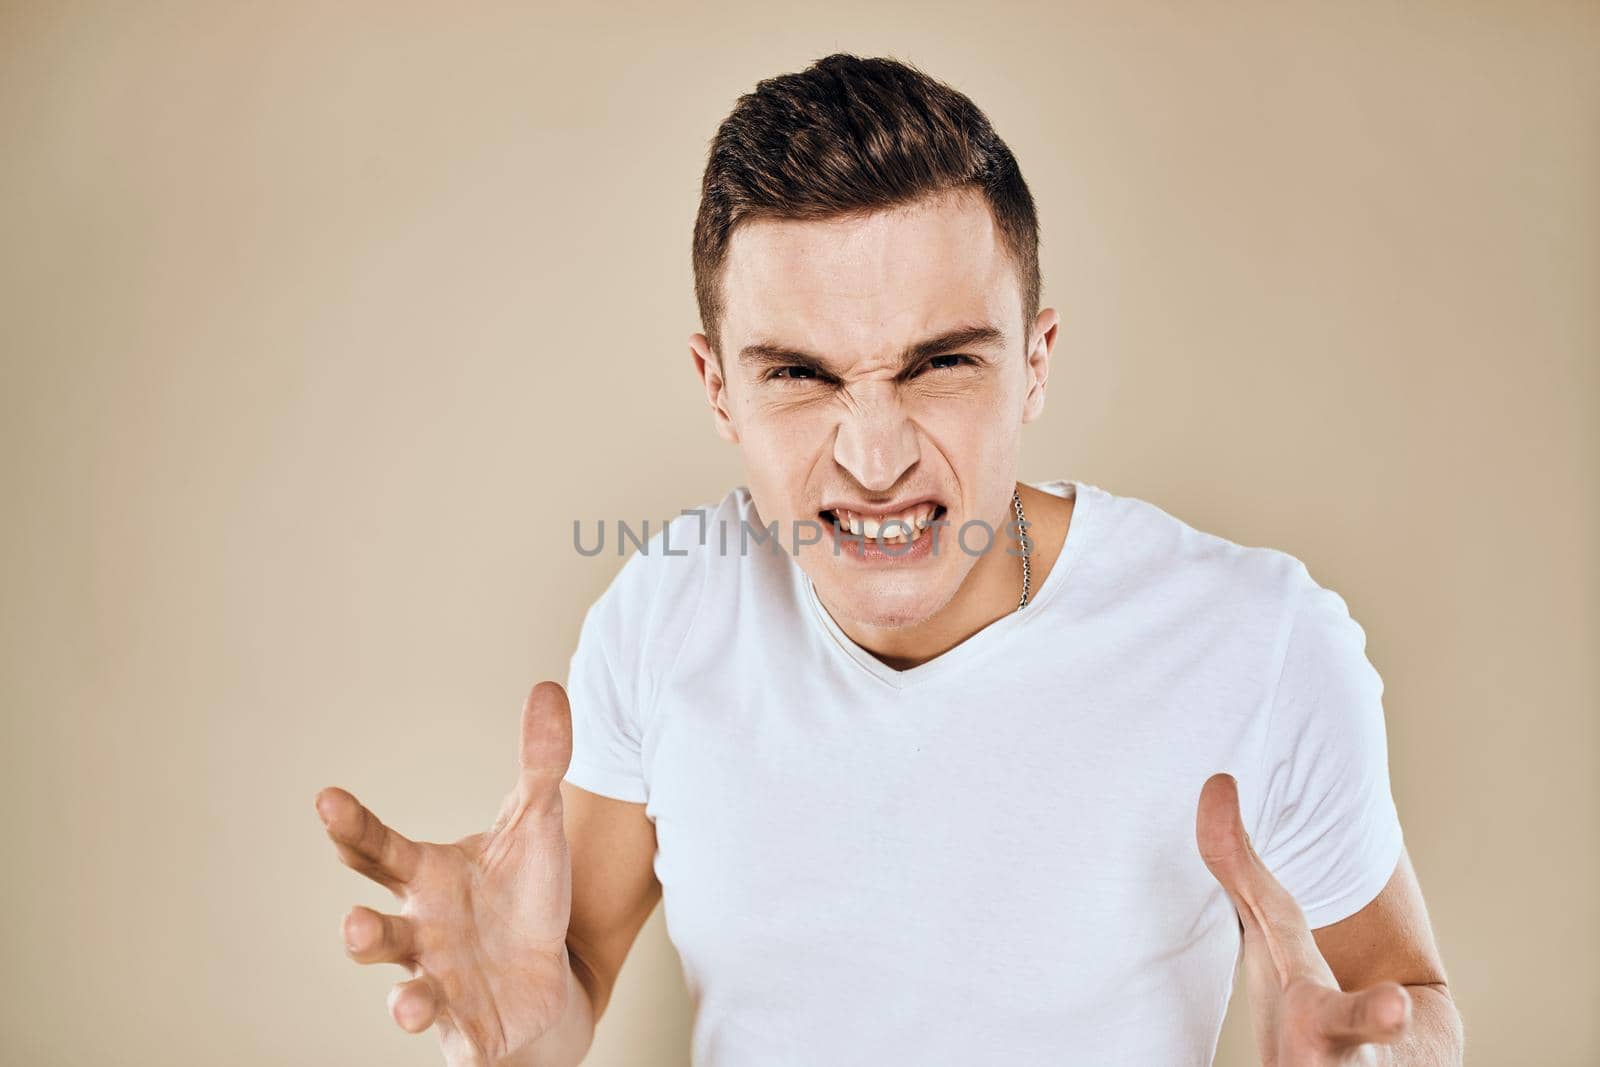 Man with displeased facial expression emotions white t-shirt gestures with hands beige background by SHOTPRIME